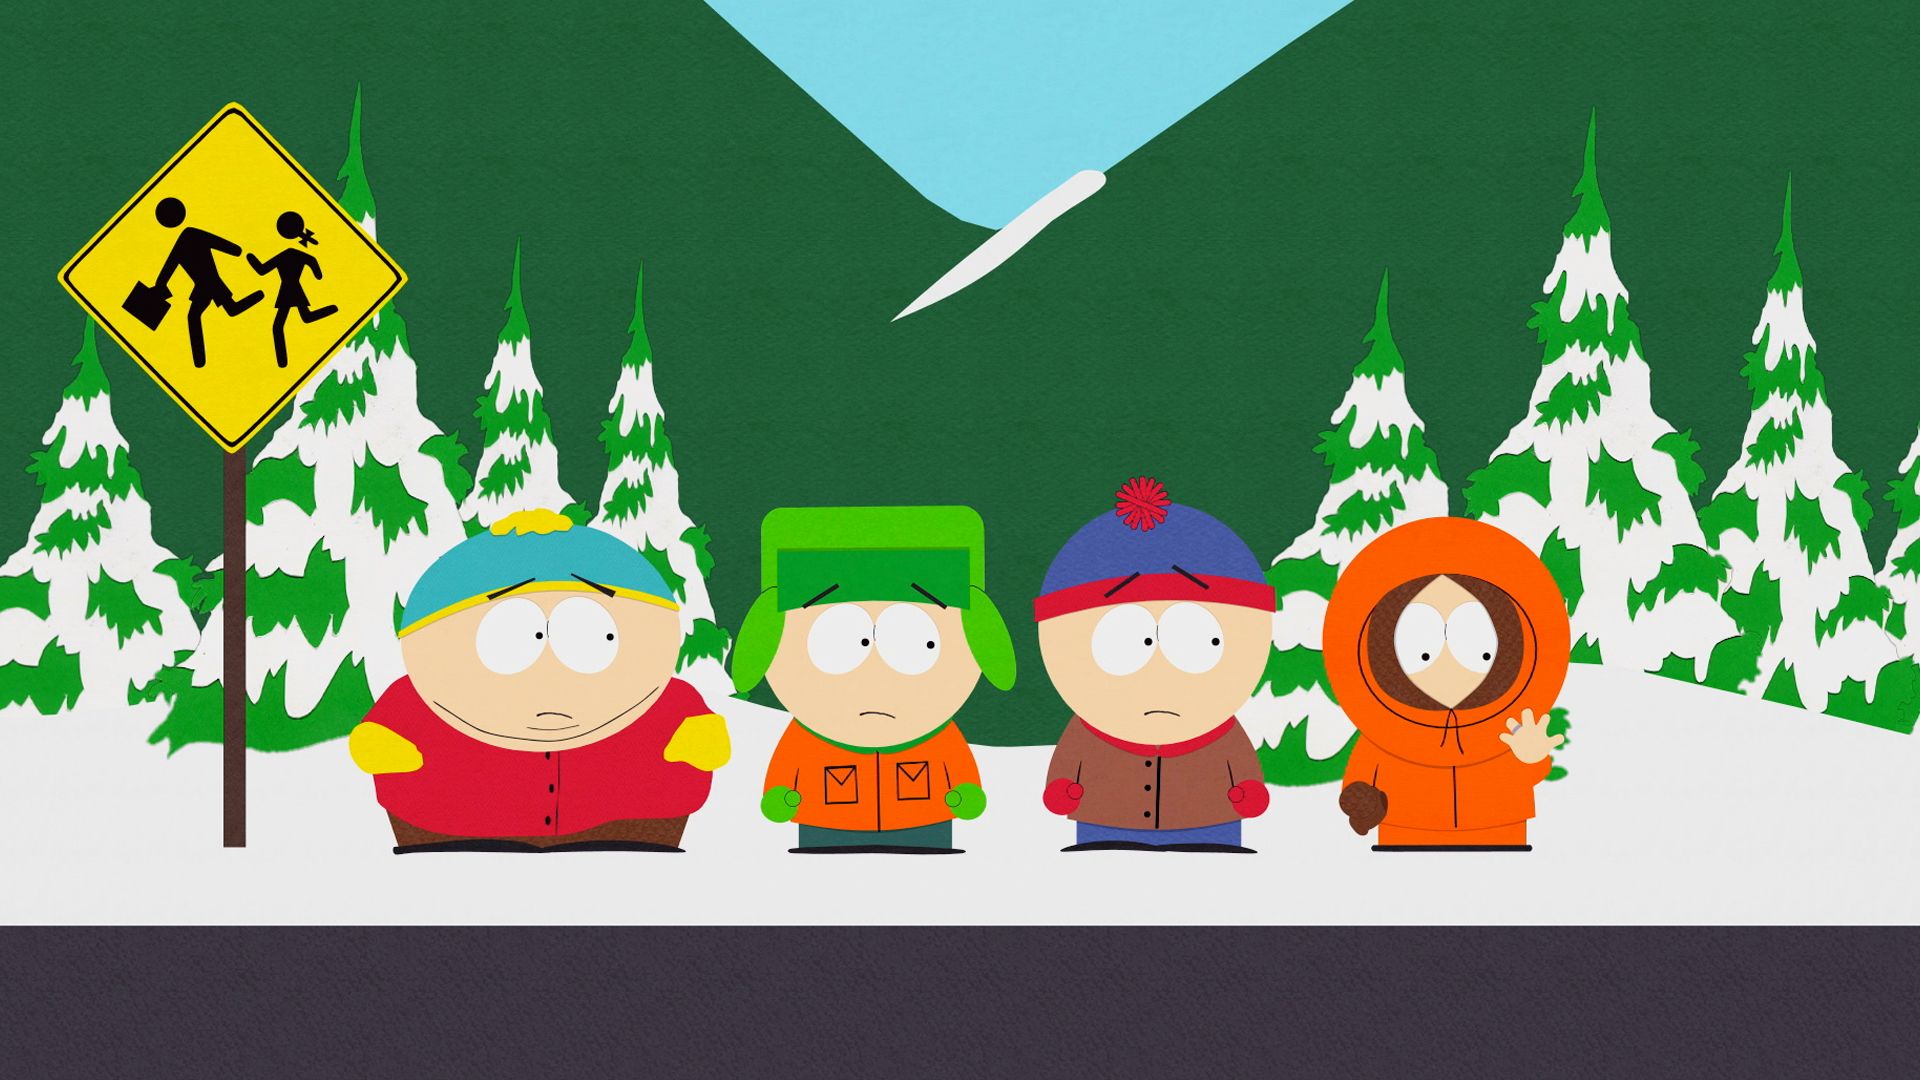 A Purity Ring?! - Seizoen 13 Aflevering 1 - South Park